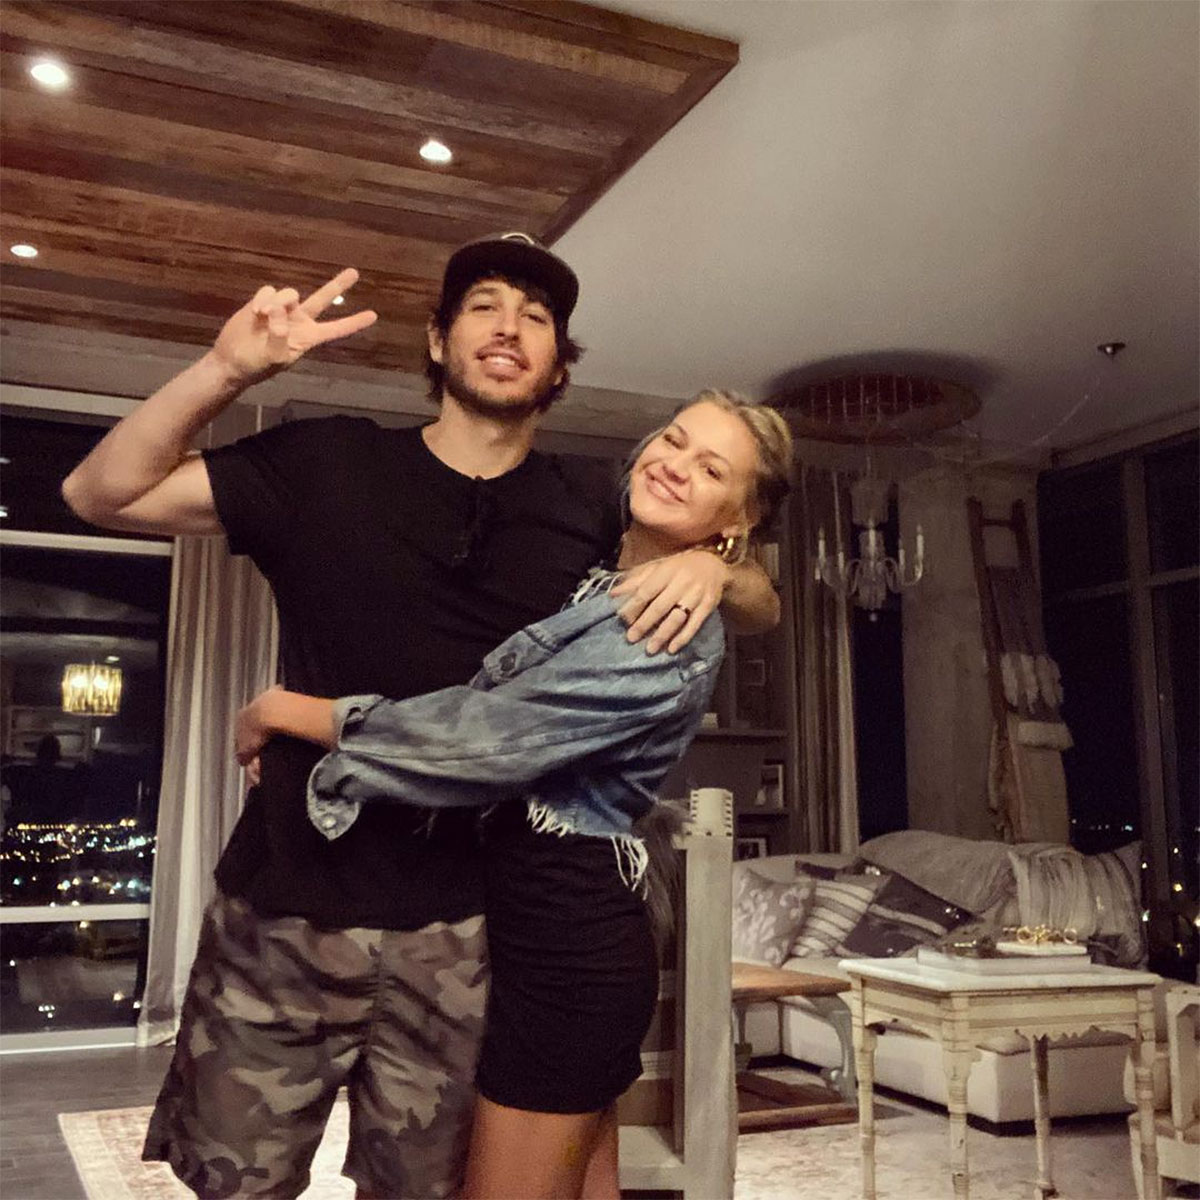 Kelsea Ballerini and Morgan Evans Relationship Timeline: From Taking Shots to Marriage and More